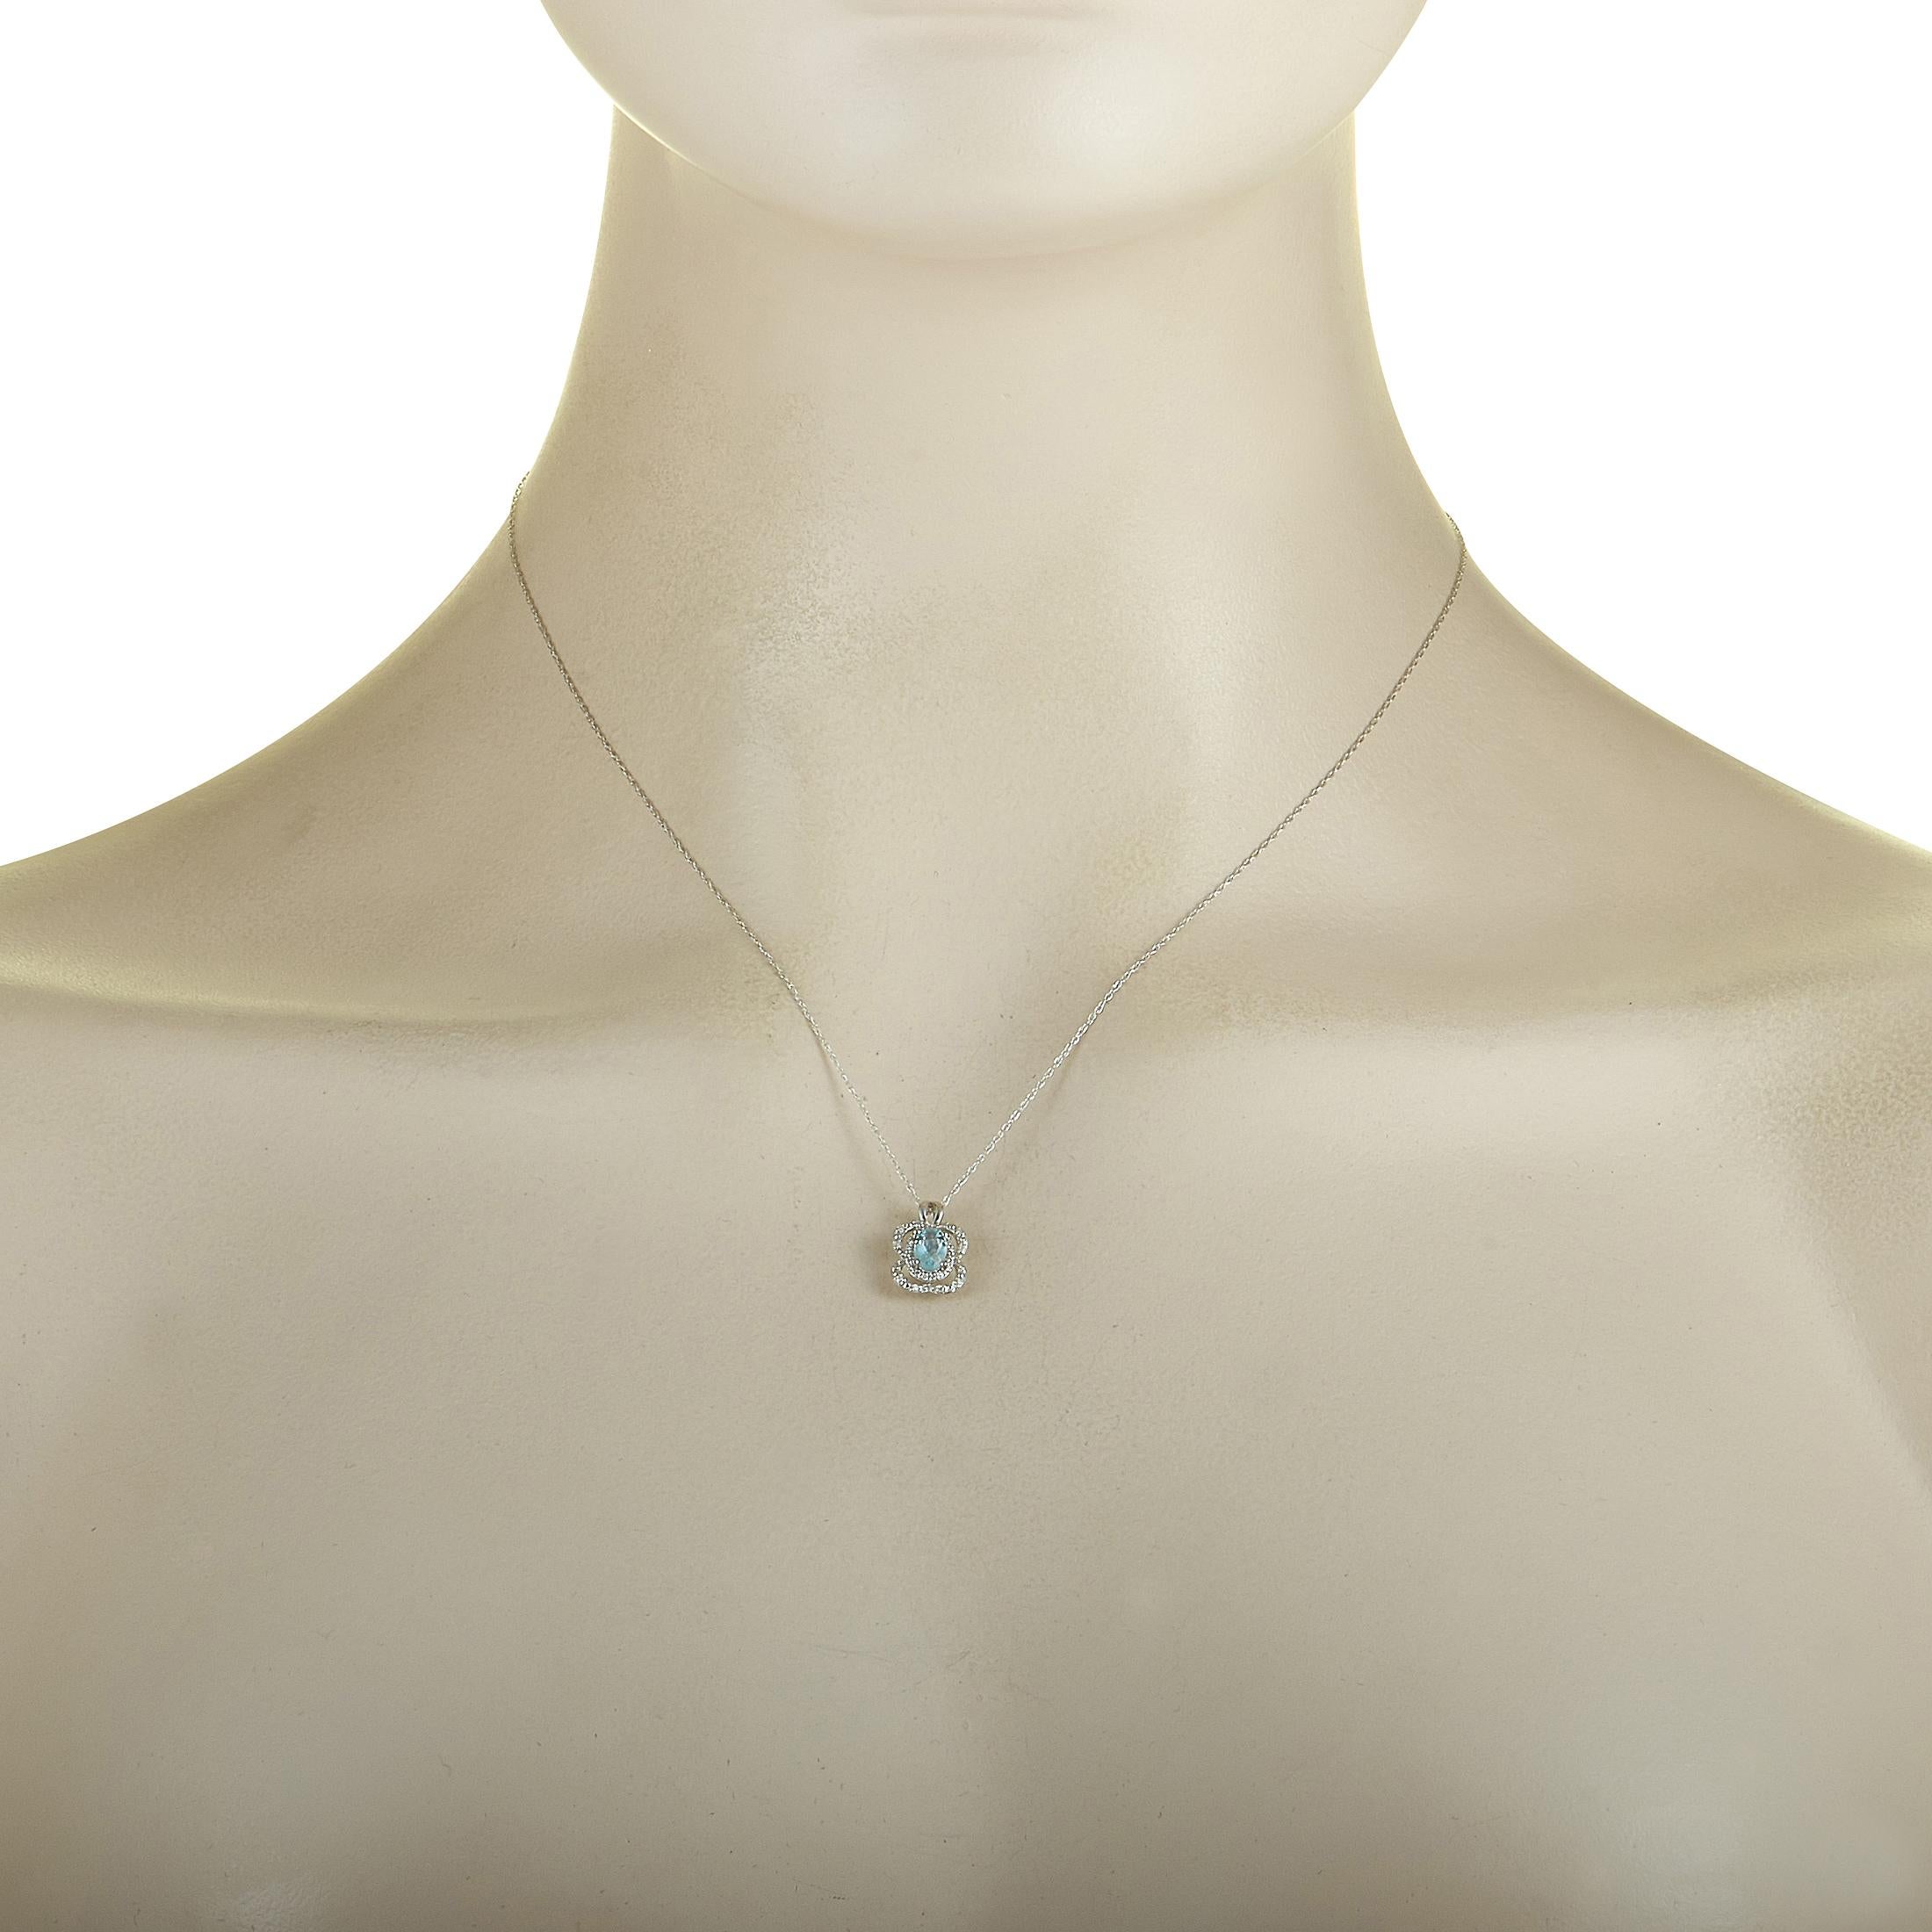 This LB Exclusive necklace is crafted from 14K white gold, boasting a 17” chain with spring ring closure and a pendant that measures 0.50” in length and 0.37” in width. The necklace weighs 1.6 grams and is set with an aquamarine and a total of 0.08